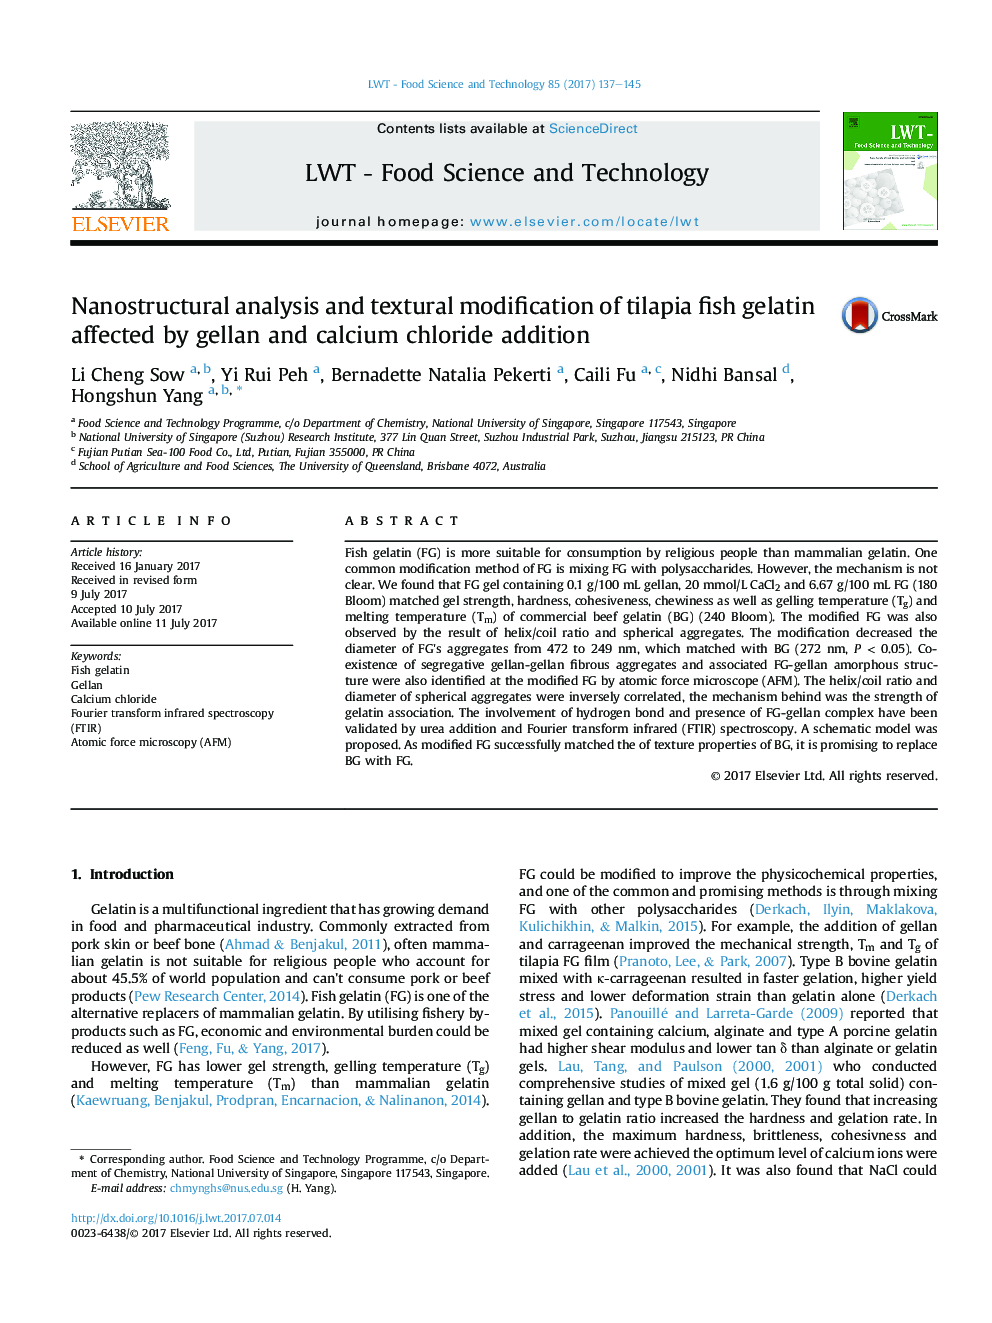 Nanostructural analysis and textural modification of tilapia fish gelatin affected by gellan and calcium chloride addition